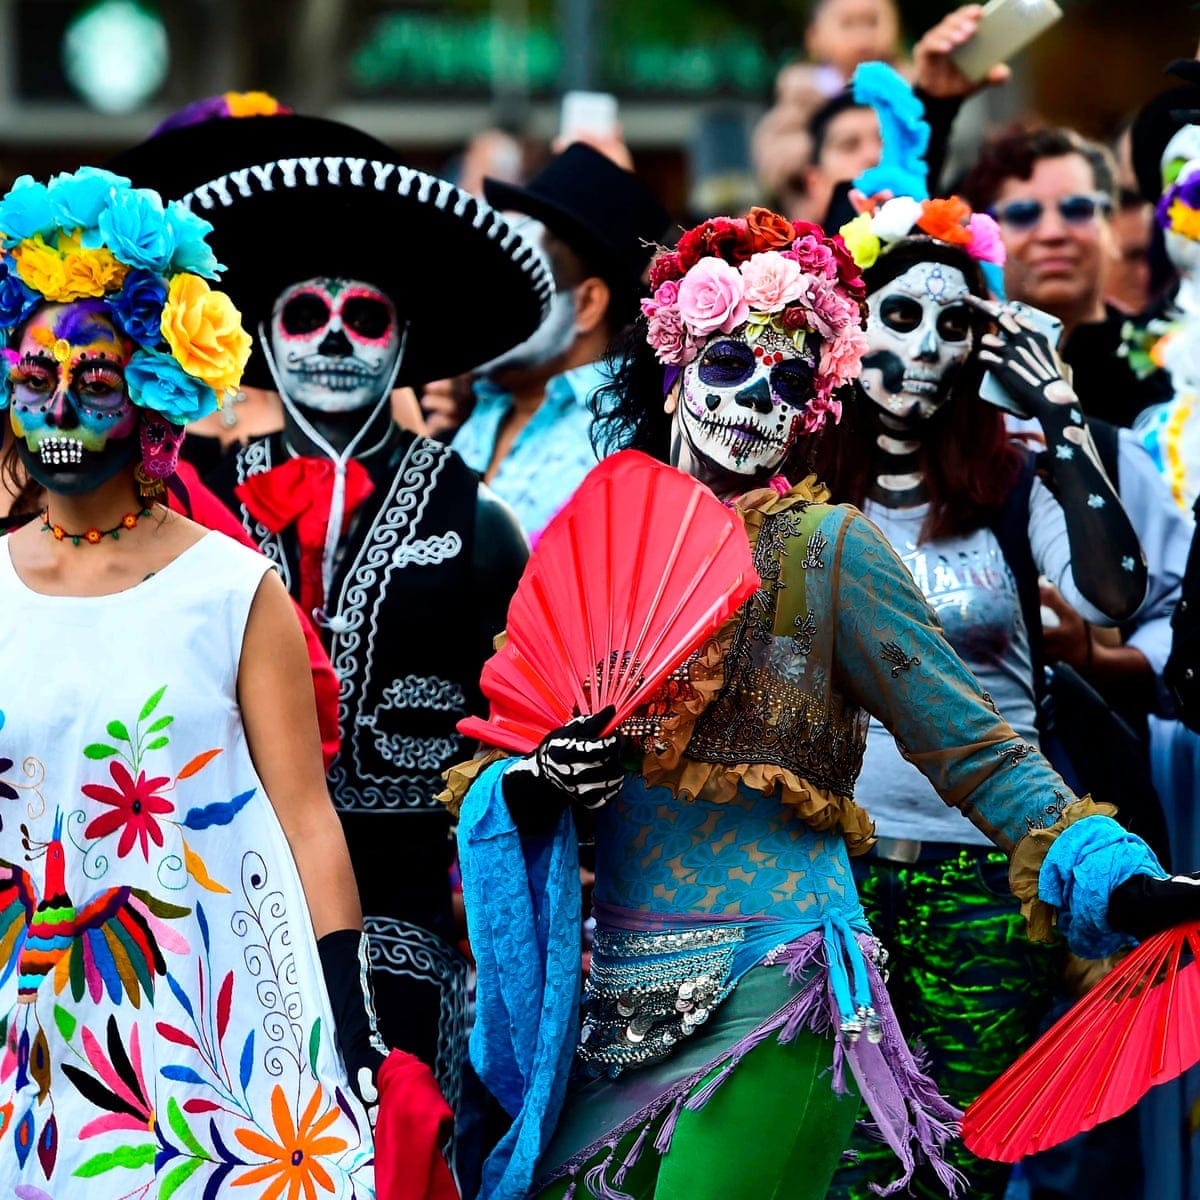 Mexicans embrace Day of the Dead spectacle in place of Halloween | Mexico |  The Guardian